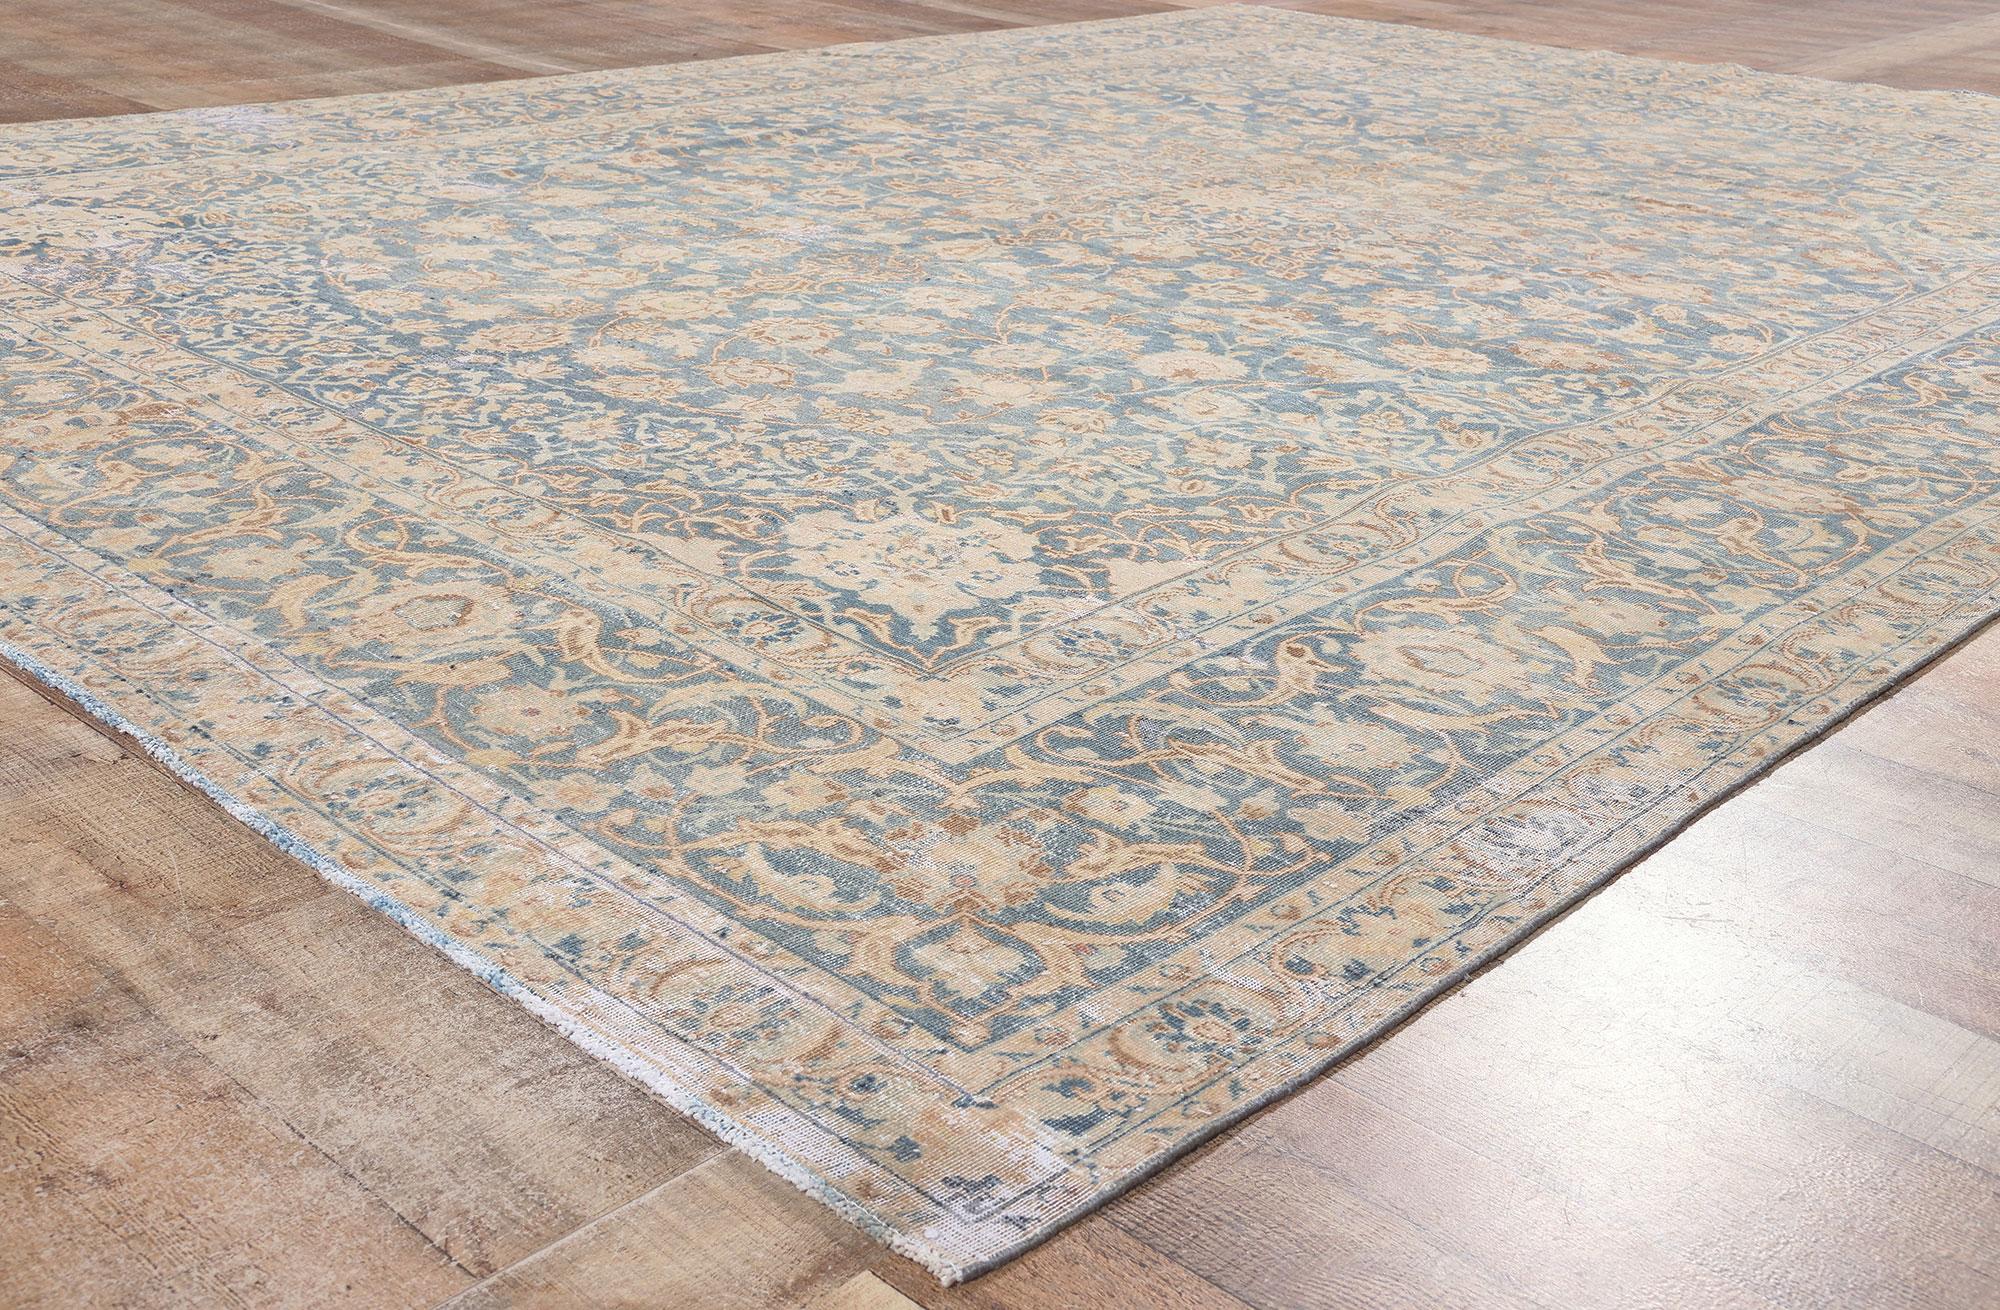 Distressed Antique Persian Tabriz Rug, Faded Soft Earth-Tone Colors For Sale 1